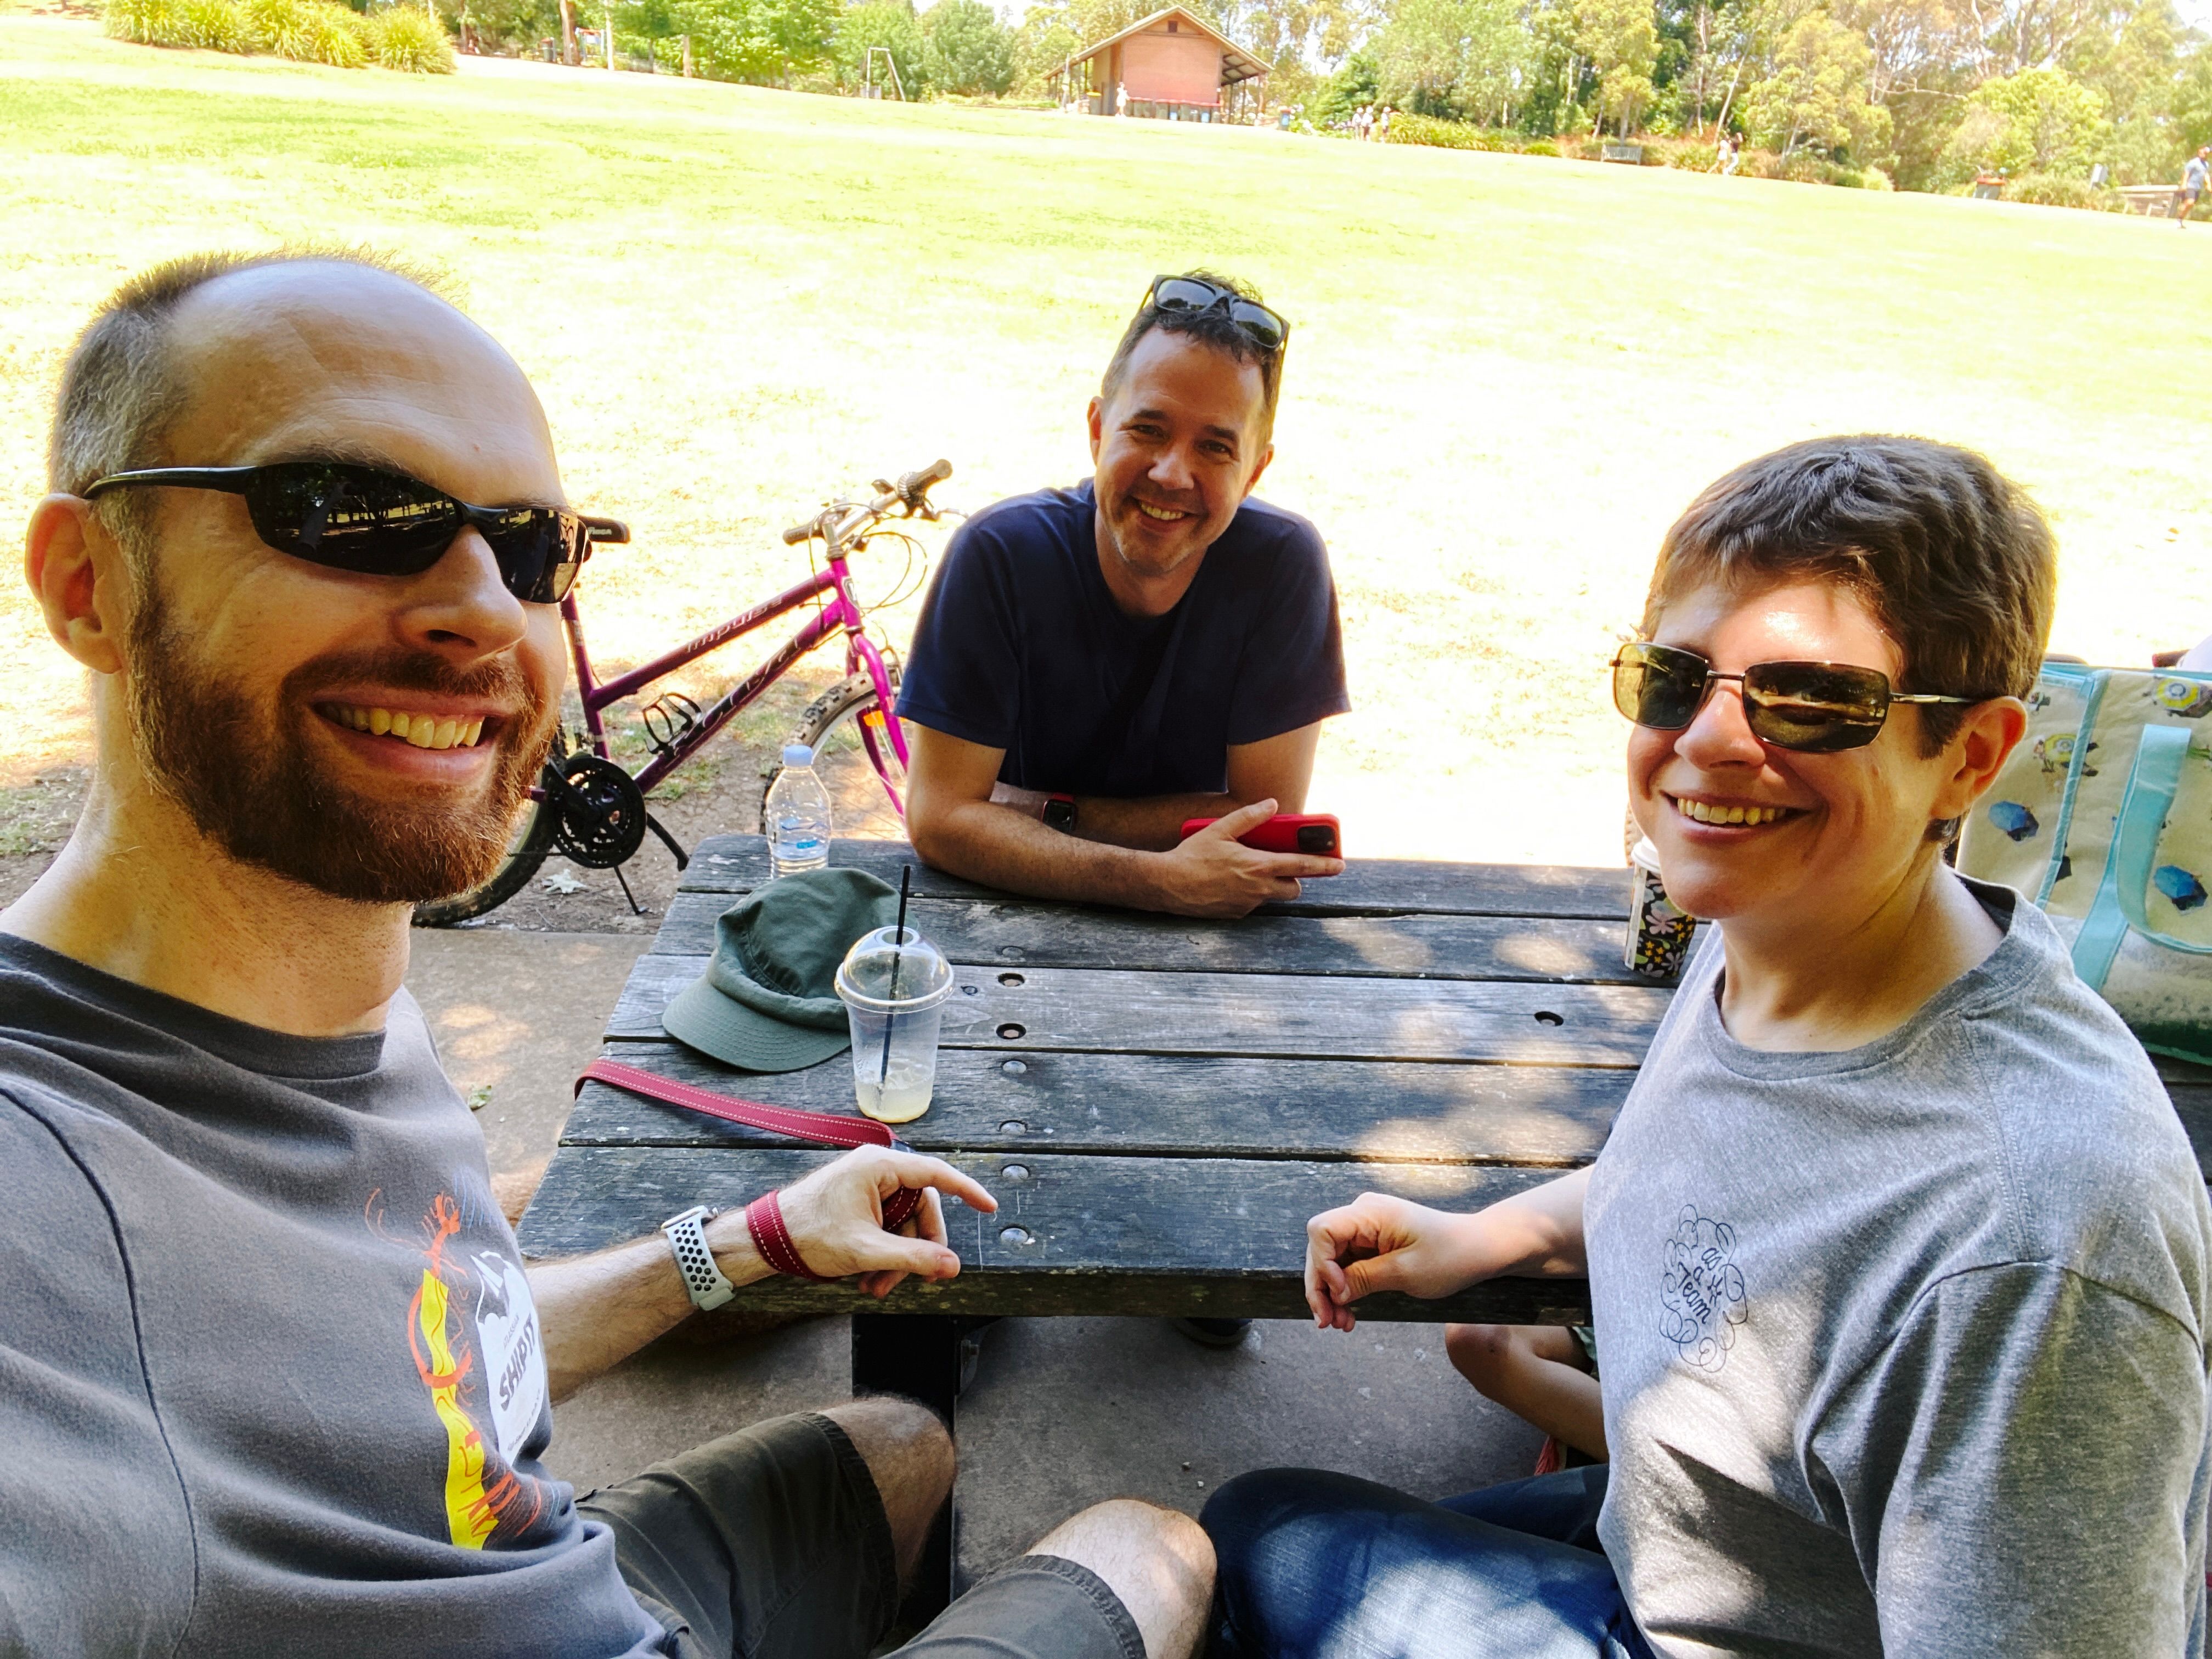 A photo of three people sitting at a park bench in the shade. There's me, a white man with a short red beard and short hair wearing sunglasses, Andrew, also a white man but without a beard, and Kristina, a white woman (also no beard) with short hair wearing sunglasses. We're all smiling at the camera.